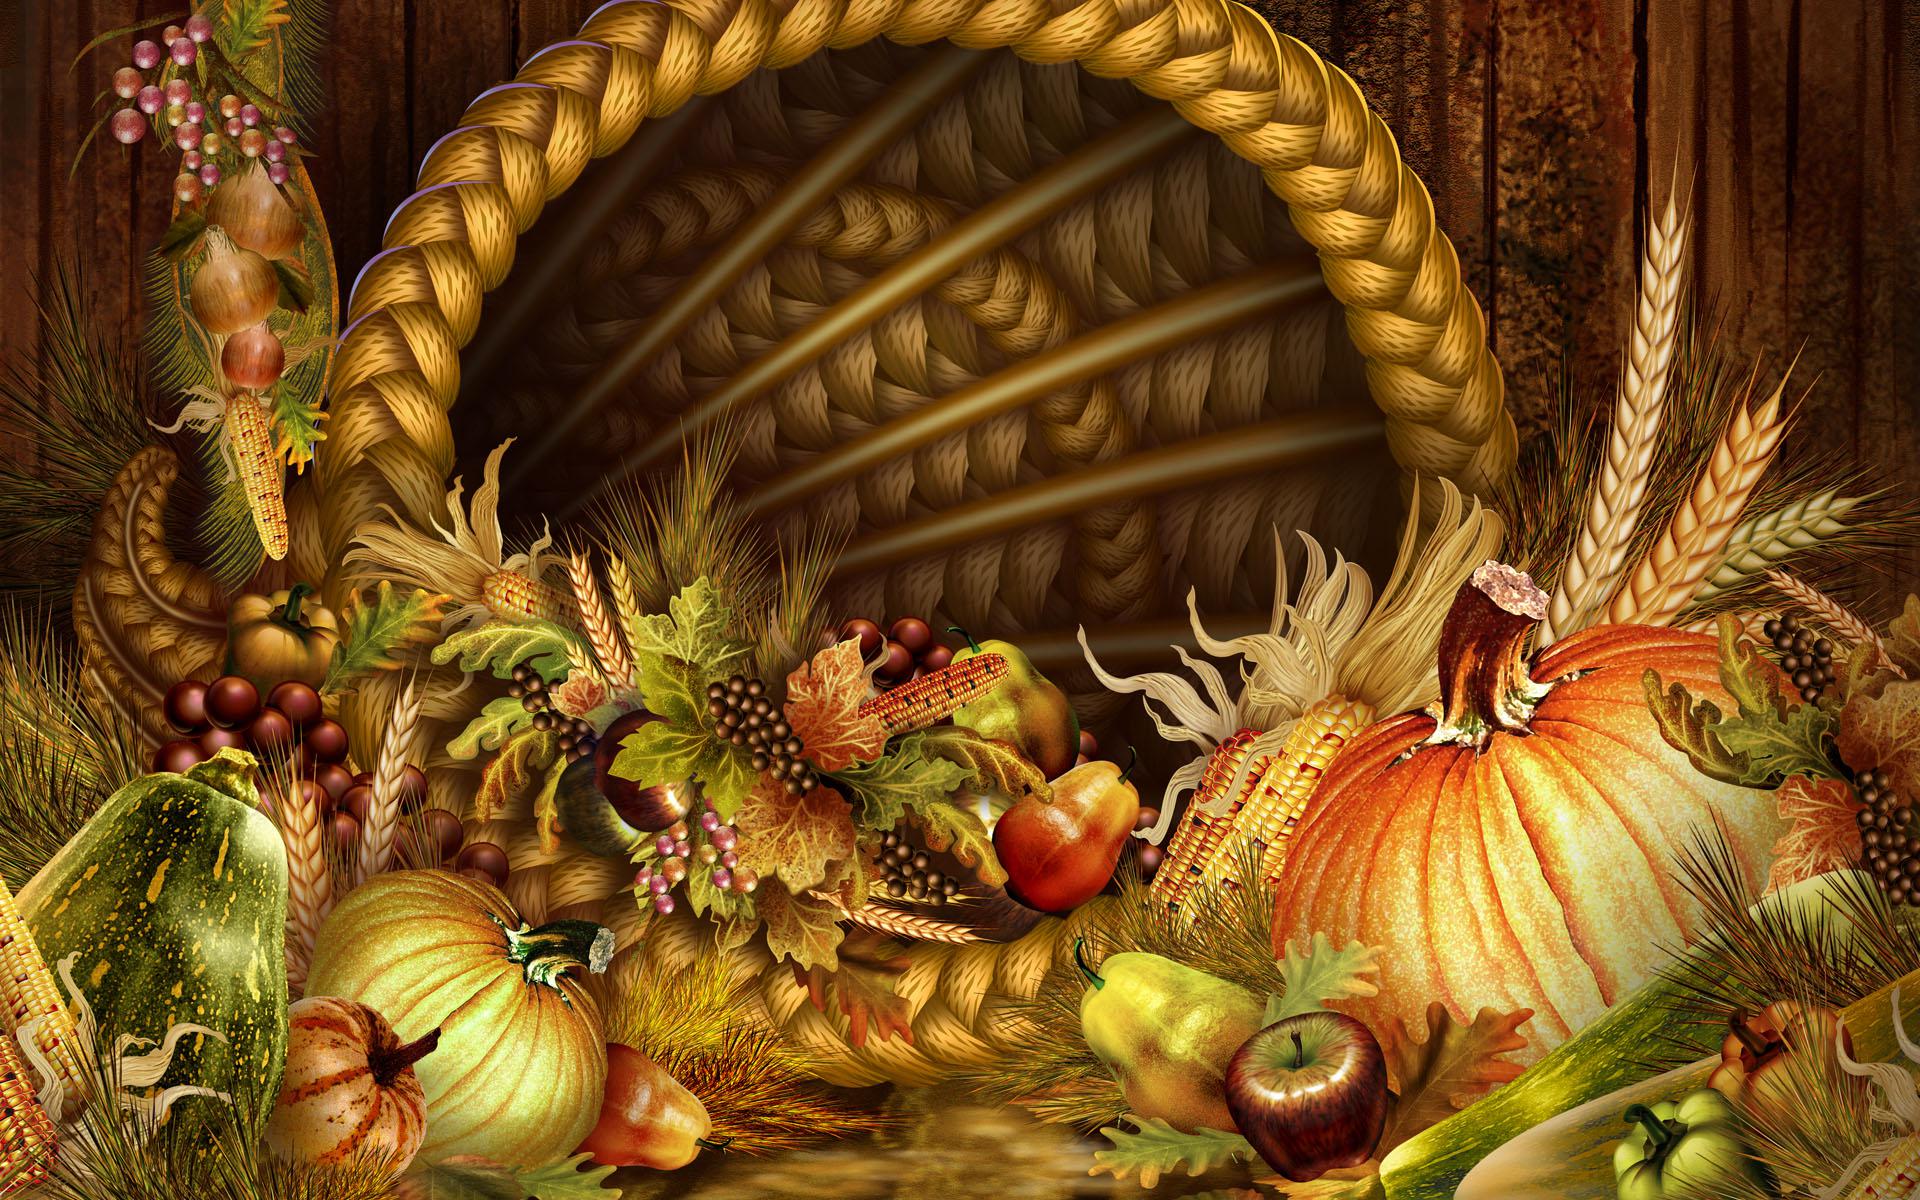 Patriotic Happy Thanksgiving Images Wallpapers